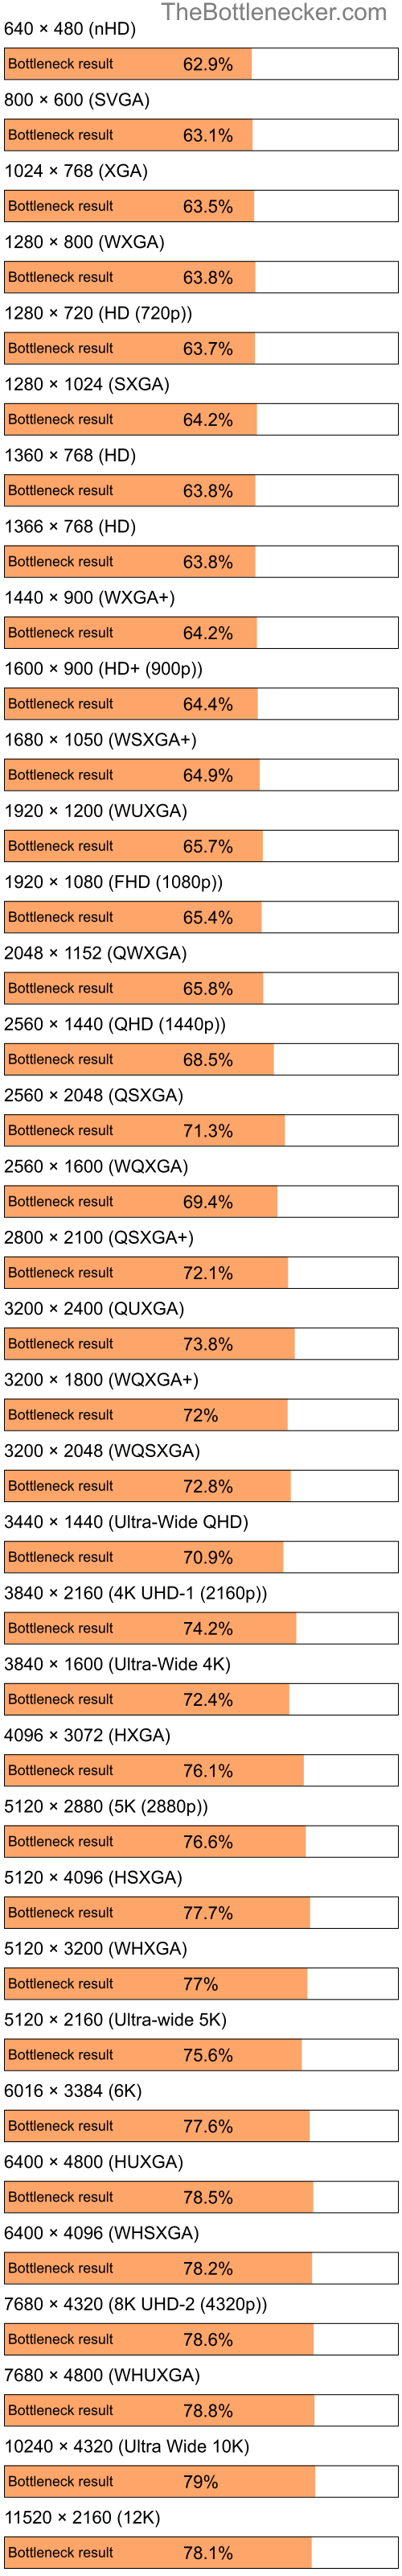 Bottleneck results by resolution for Intel Celeron M 420 and AMD M880G with Mobility Radeon HD 4200 in General Tasks